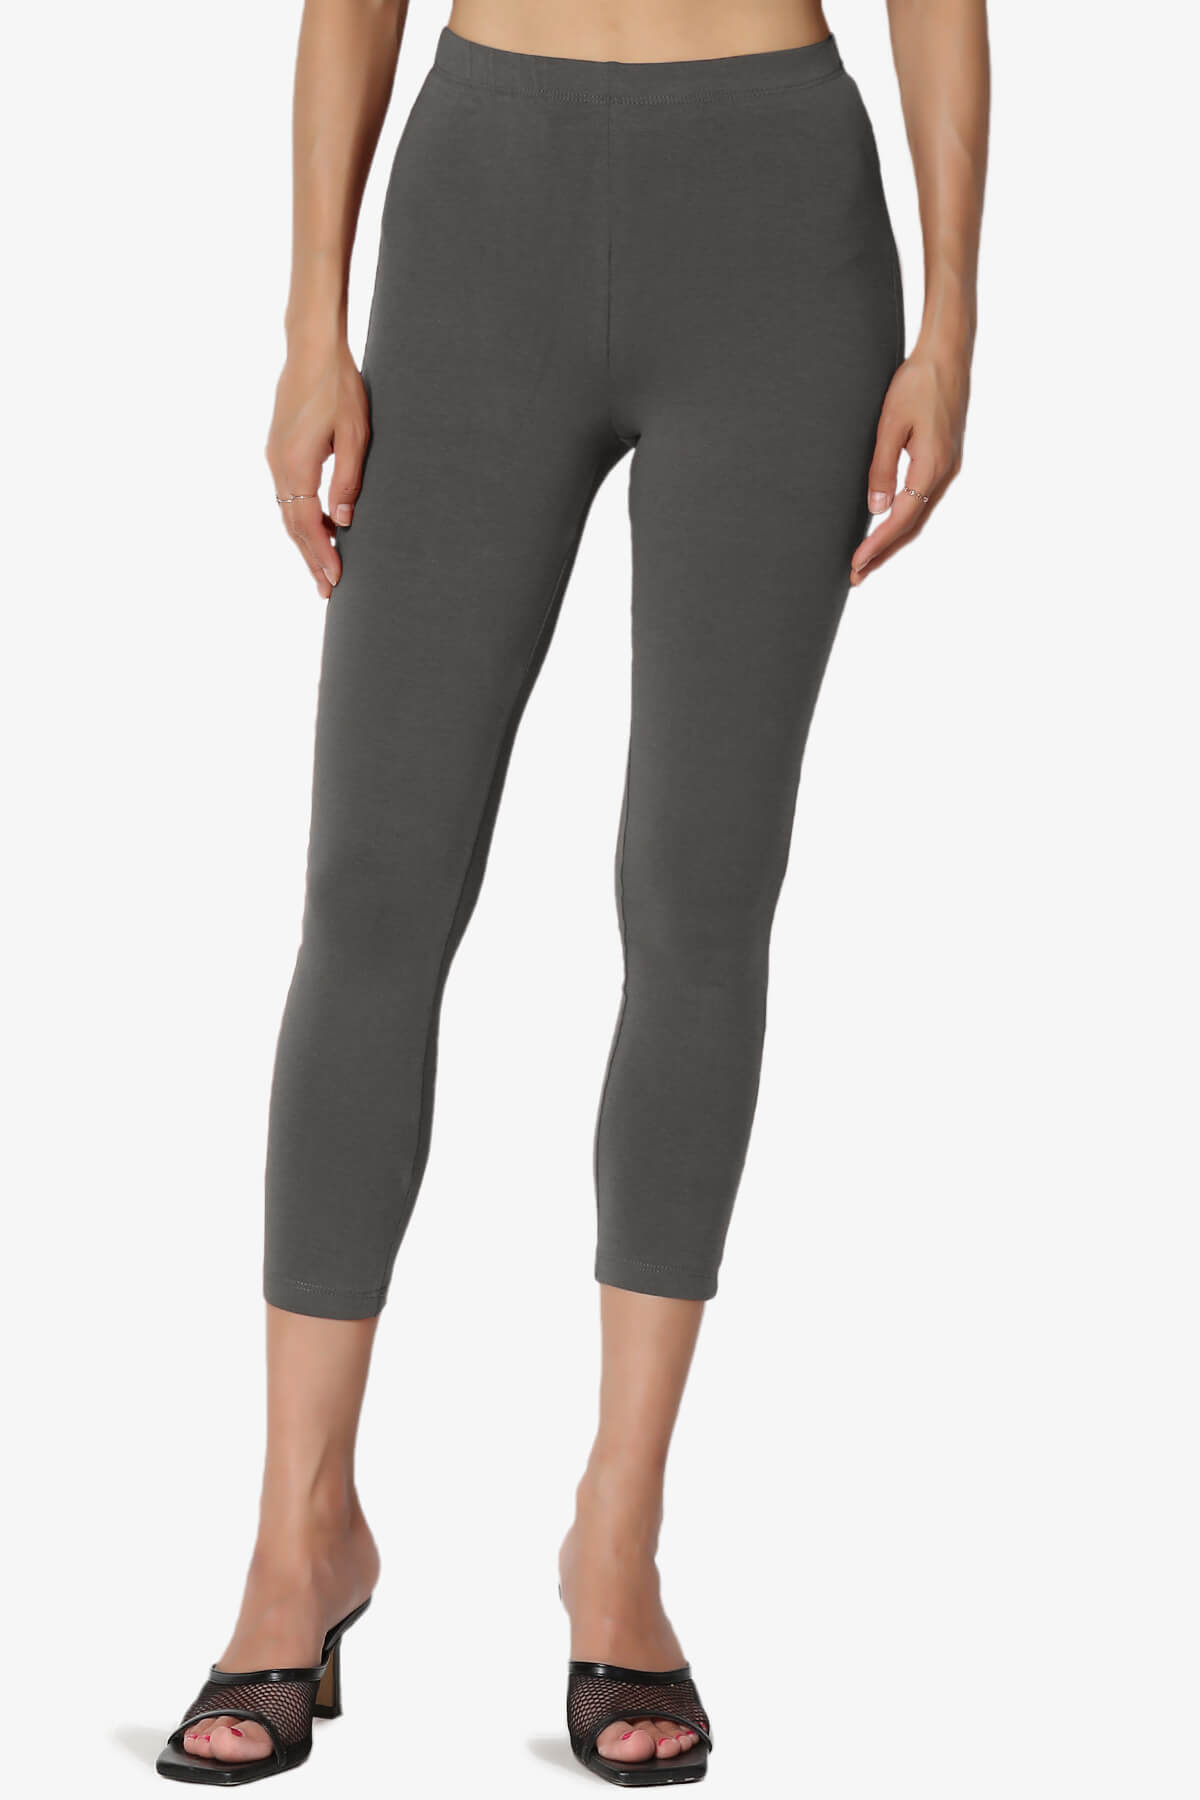 Load image into Gallery viewer, Ansley Luxe Cotton Capri Leggings ASH GREY_1
